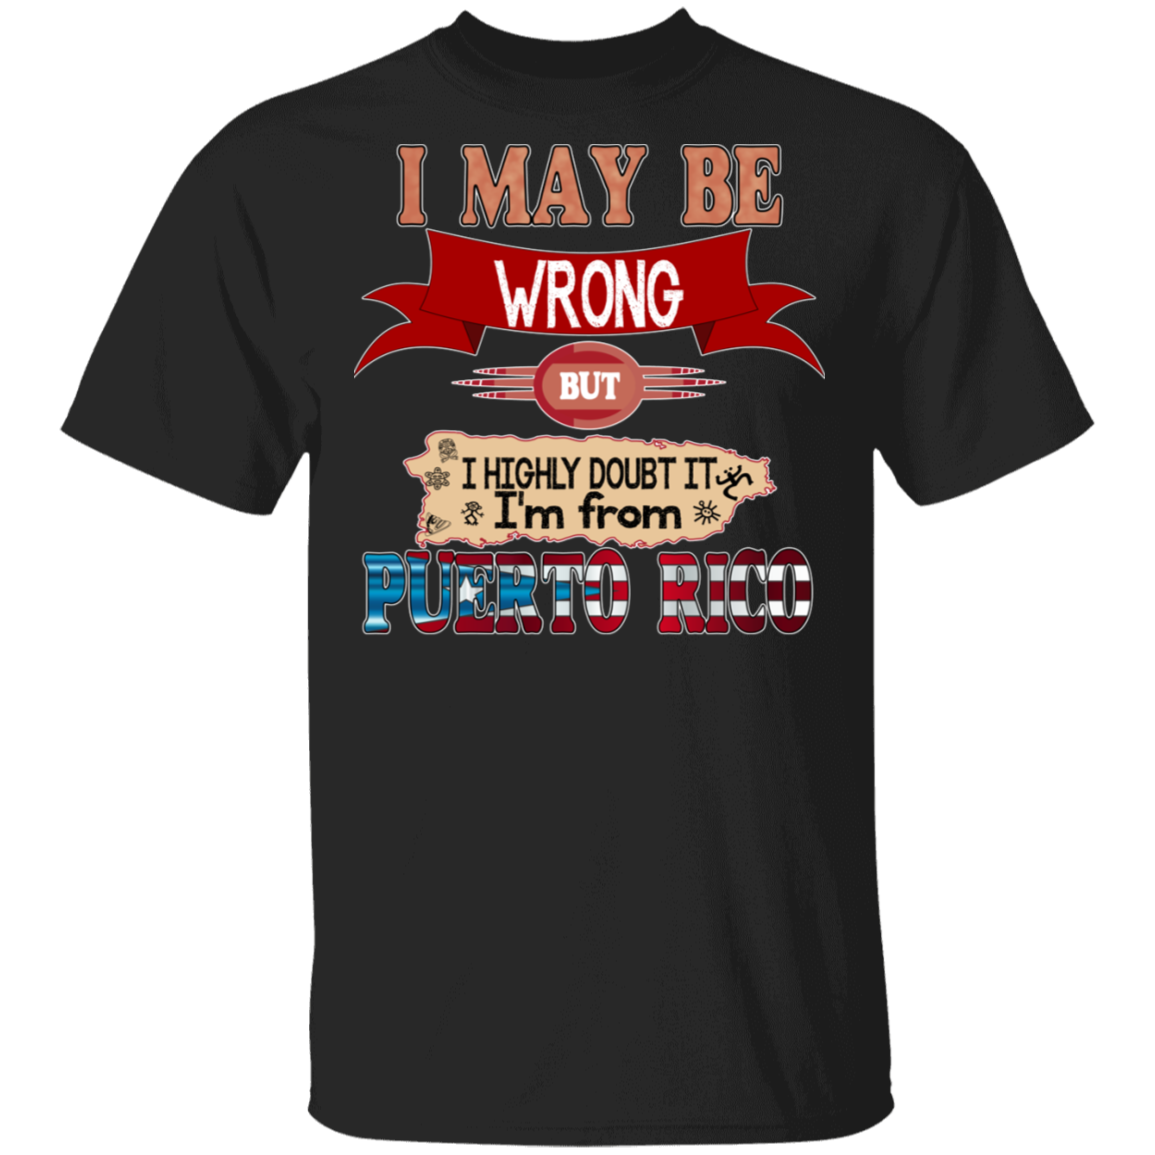 May Be Wrong But Doubt It - 5.3 oz. T-Shirt - Puerto Rican Pride